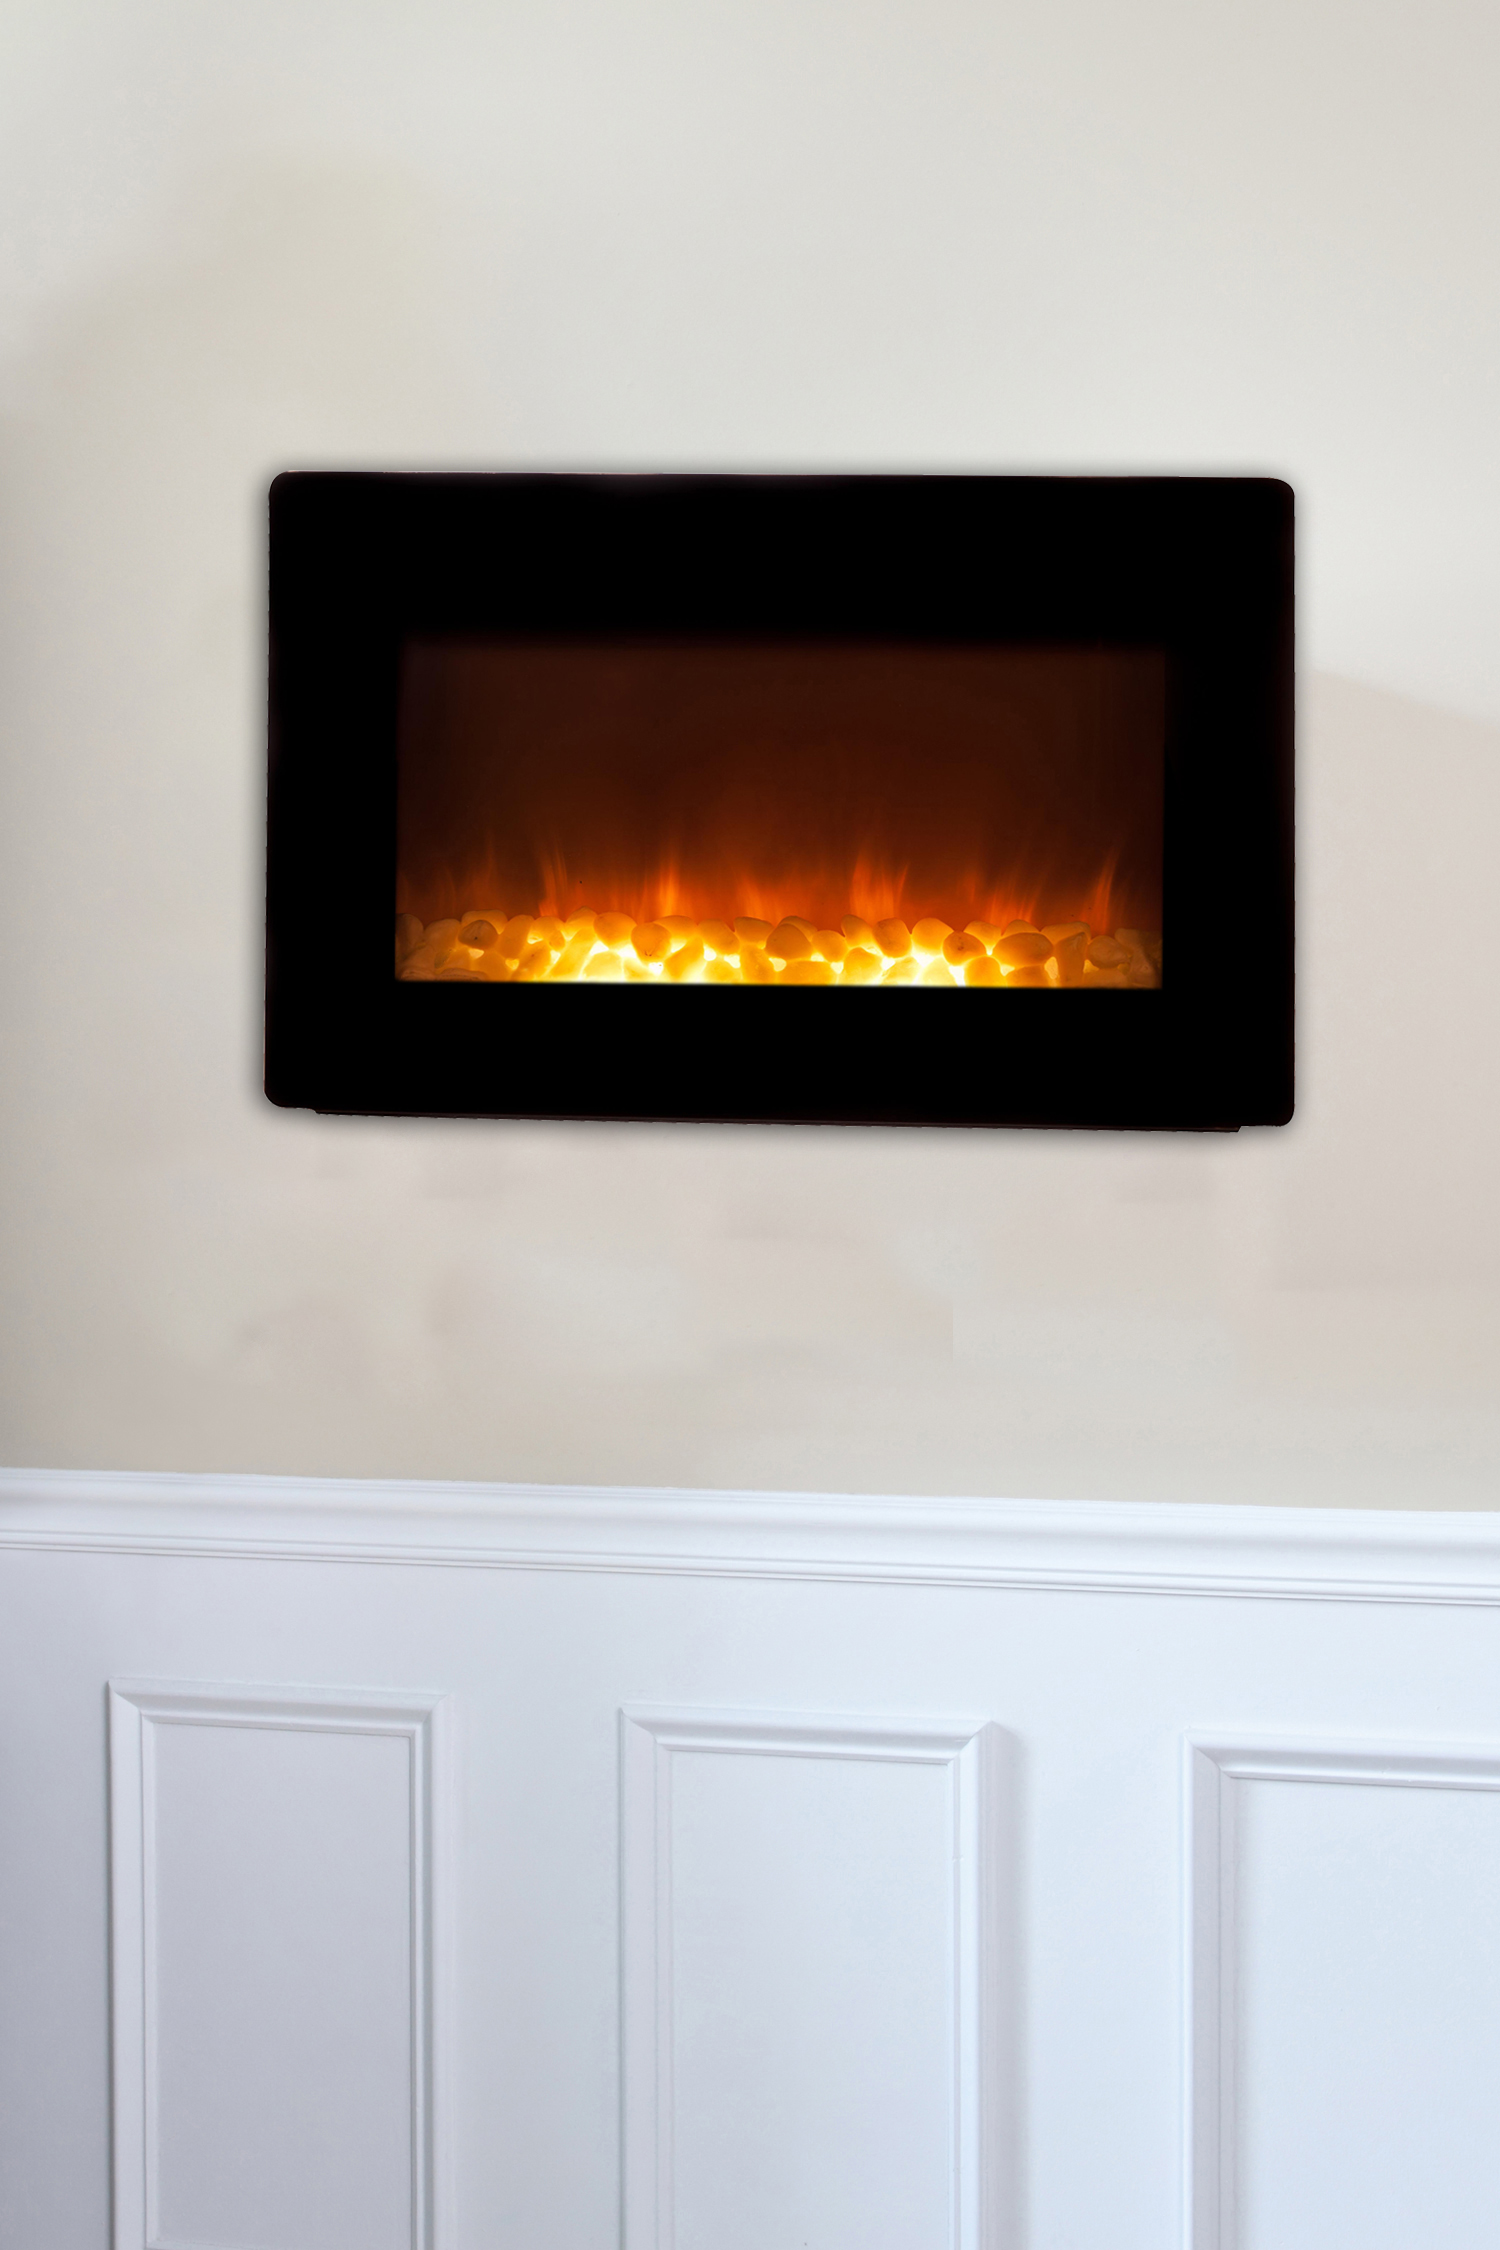 Black Wall Mounted Electric Fireplace - image 4 of 7